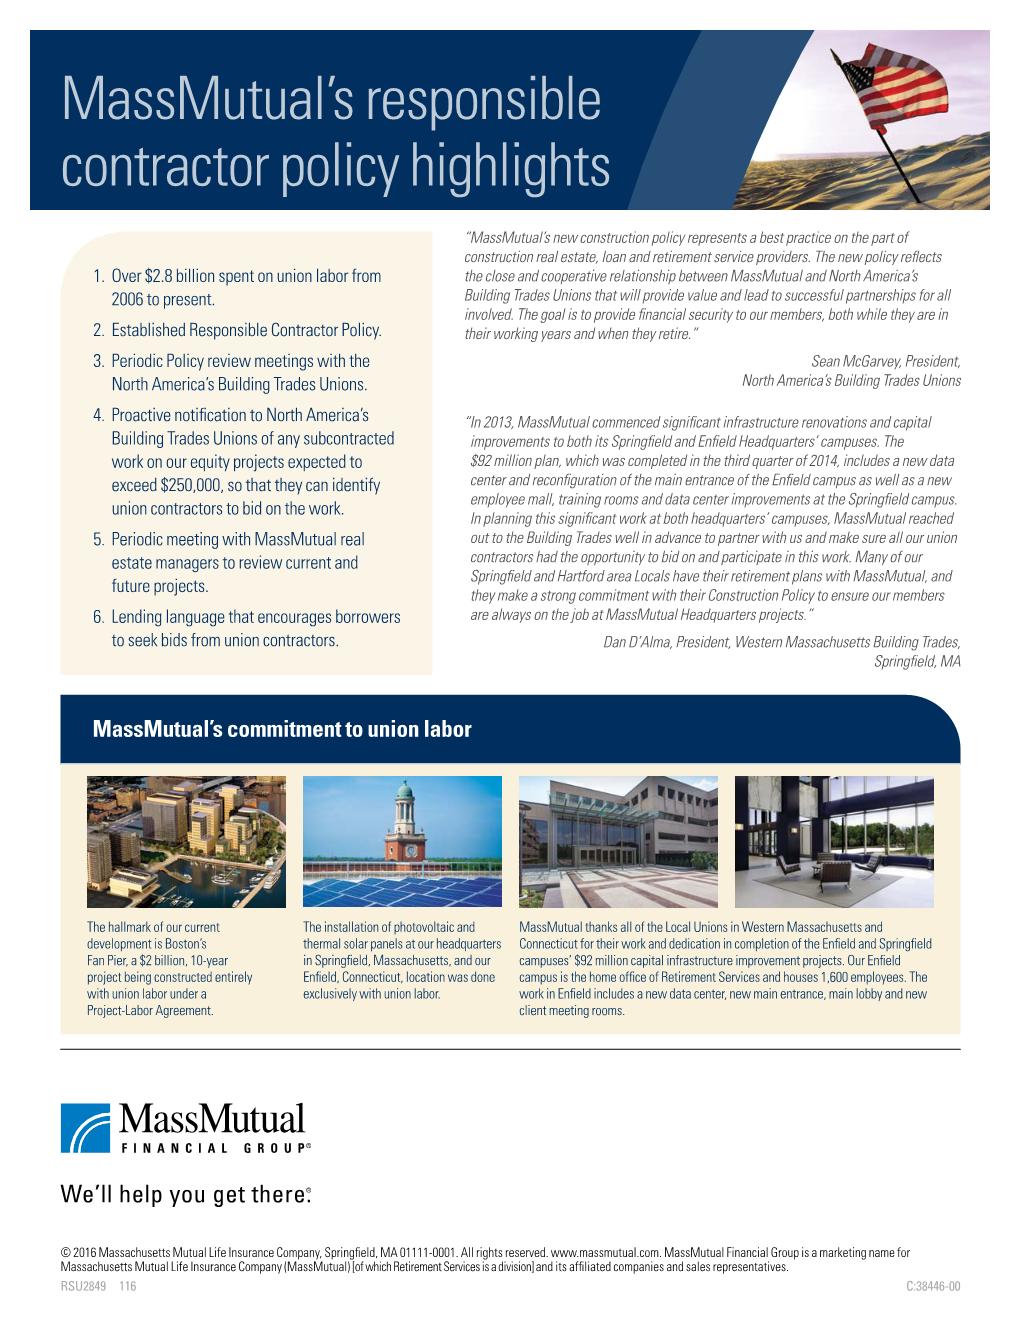 Massmutual's Responsible Contractor Policy Highlights